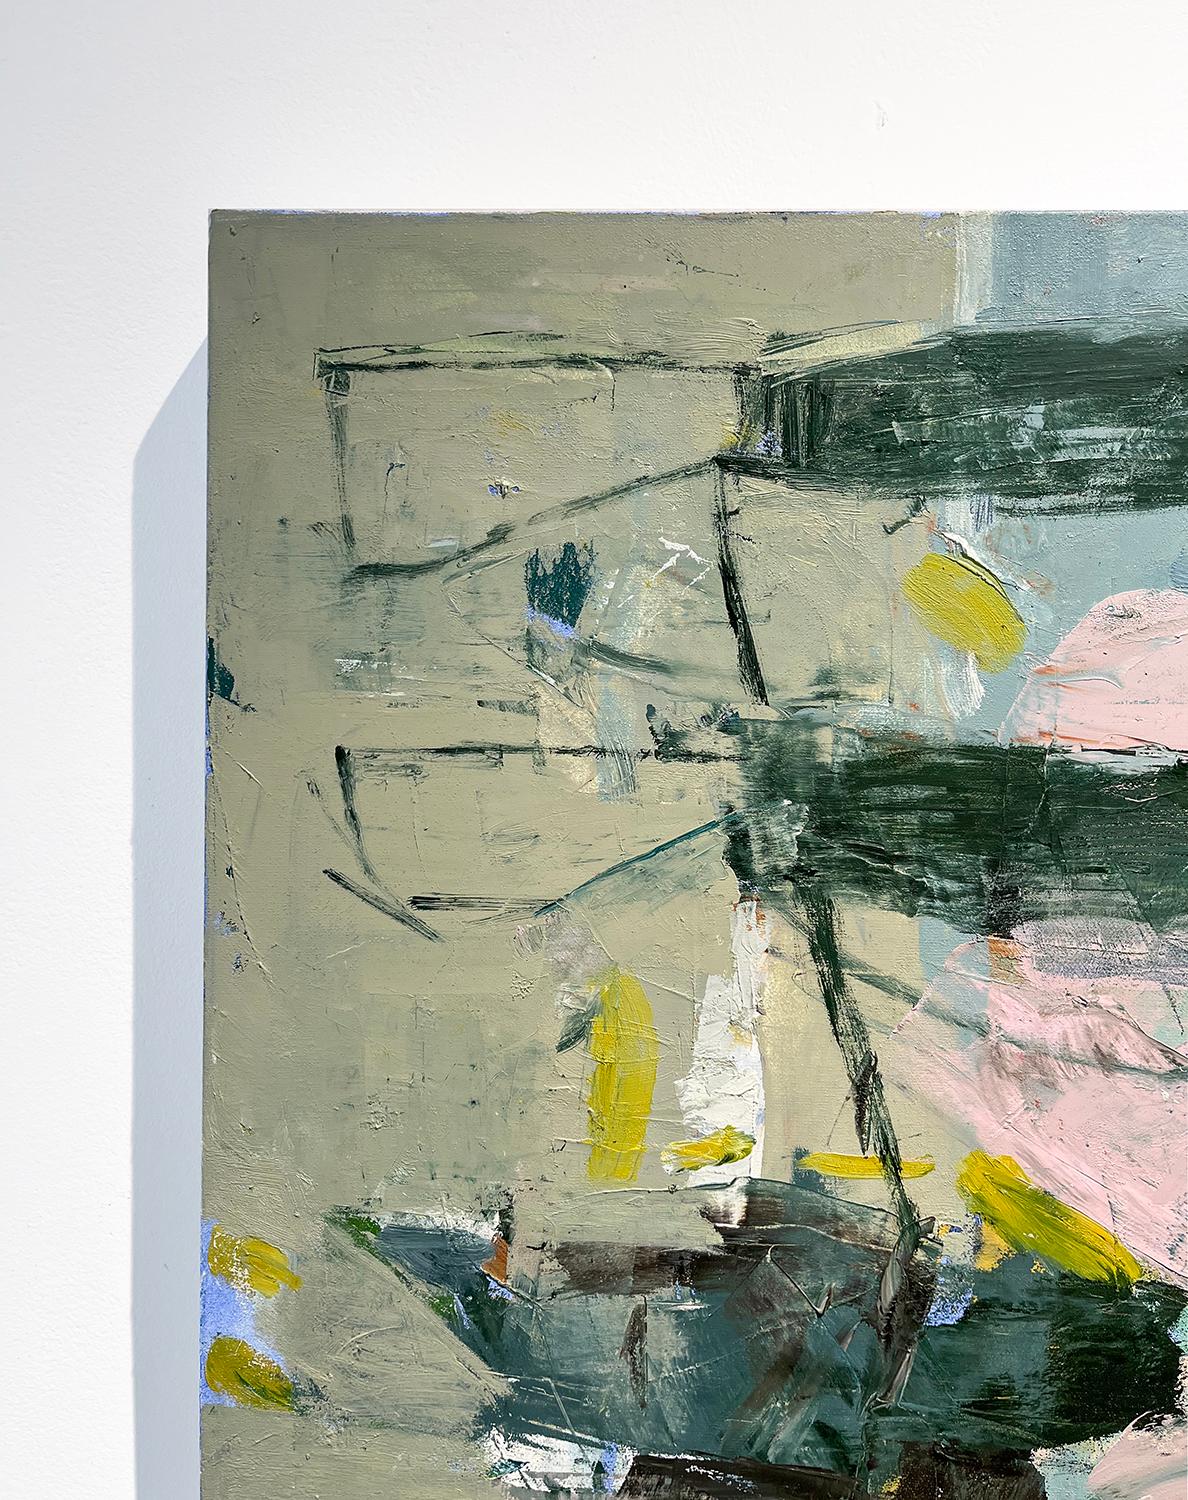 Square abstract expressionist oil painting on canvas in stone blue, green, dusty pink, and brown, with hints of orange throughout
'Meet June' painted by Hudson Valley artist, Jenny Nelson, in 2023
Oil on canvas
30 x 30 x 1 inches, with white painted